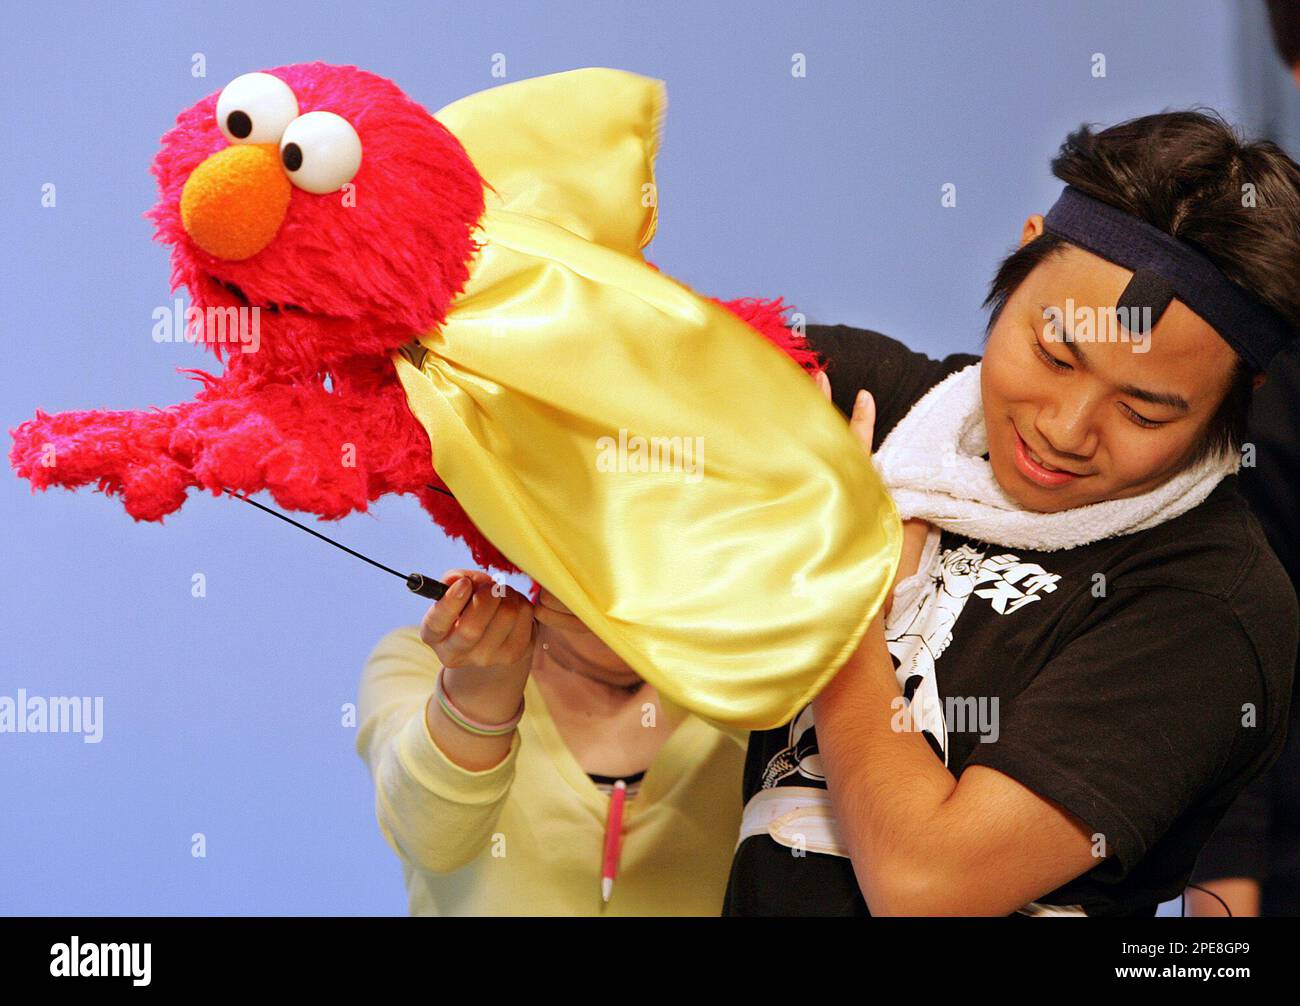 Kenta Matsumoto, a Muppet operator, handles Elmo, a popular Sesame Street  character, during a TV show filming at a Tokyo studio Wednesday, March 23,  2005. Some signs are in Japanese and the